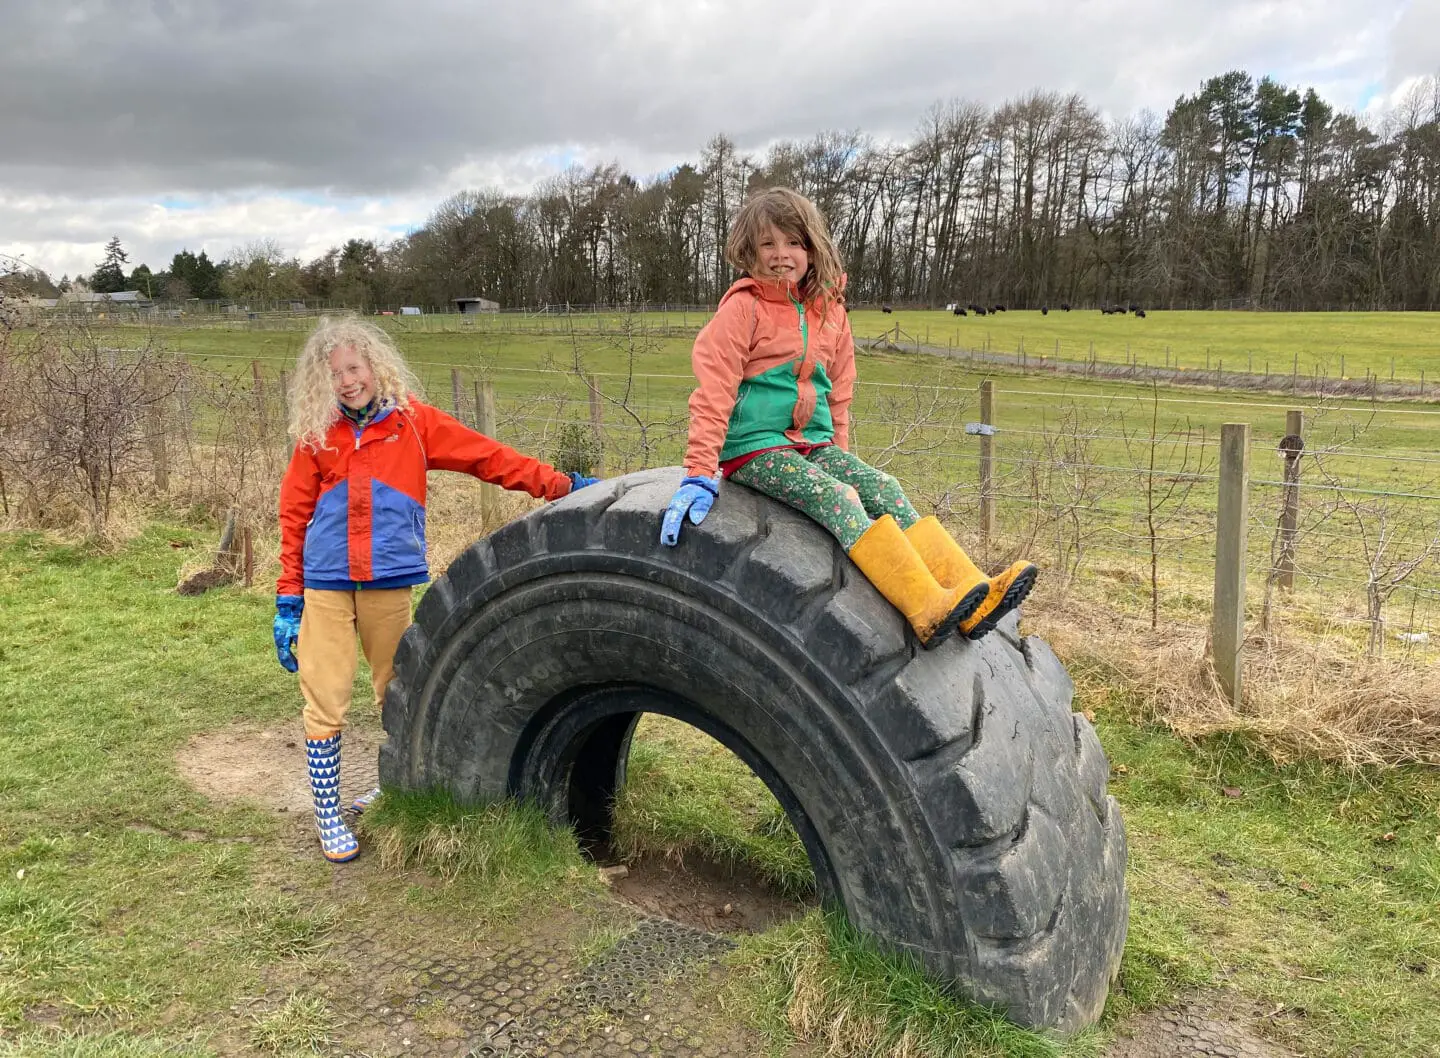 Children on a giant tyre of nature play trail